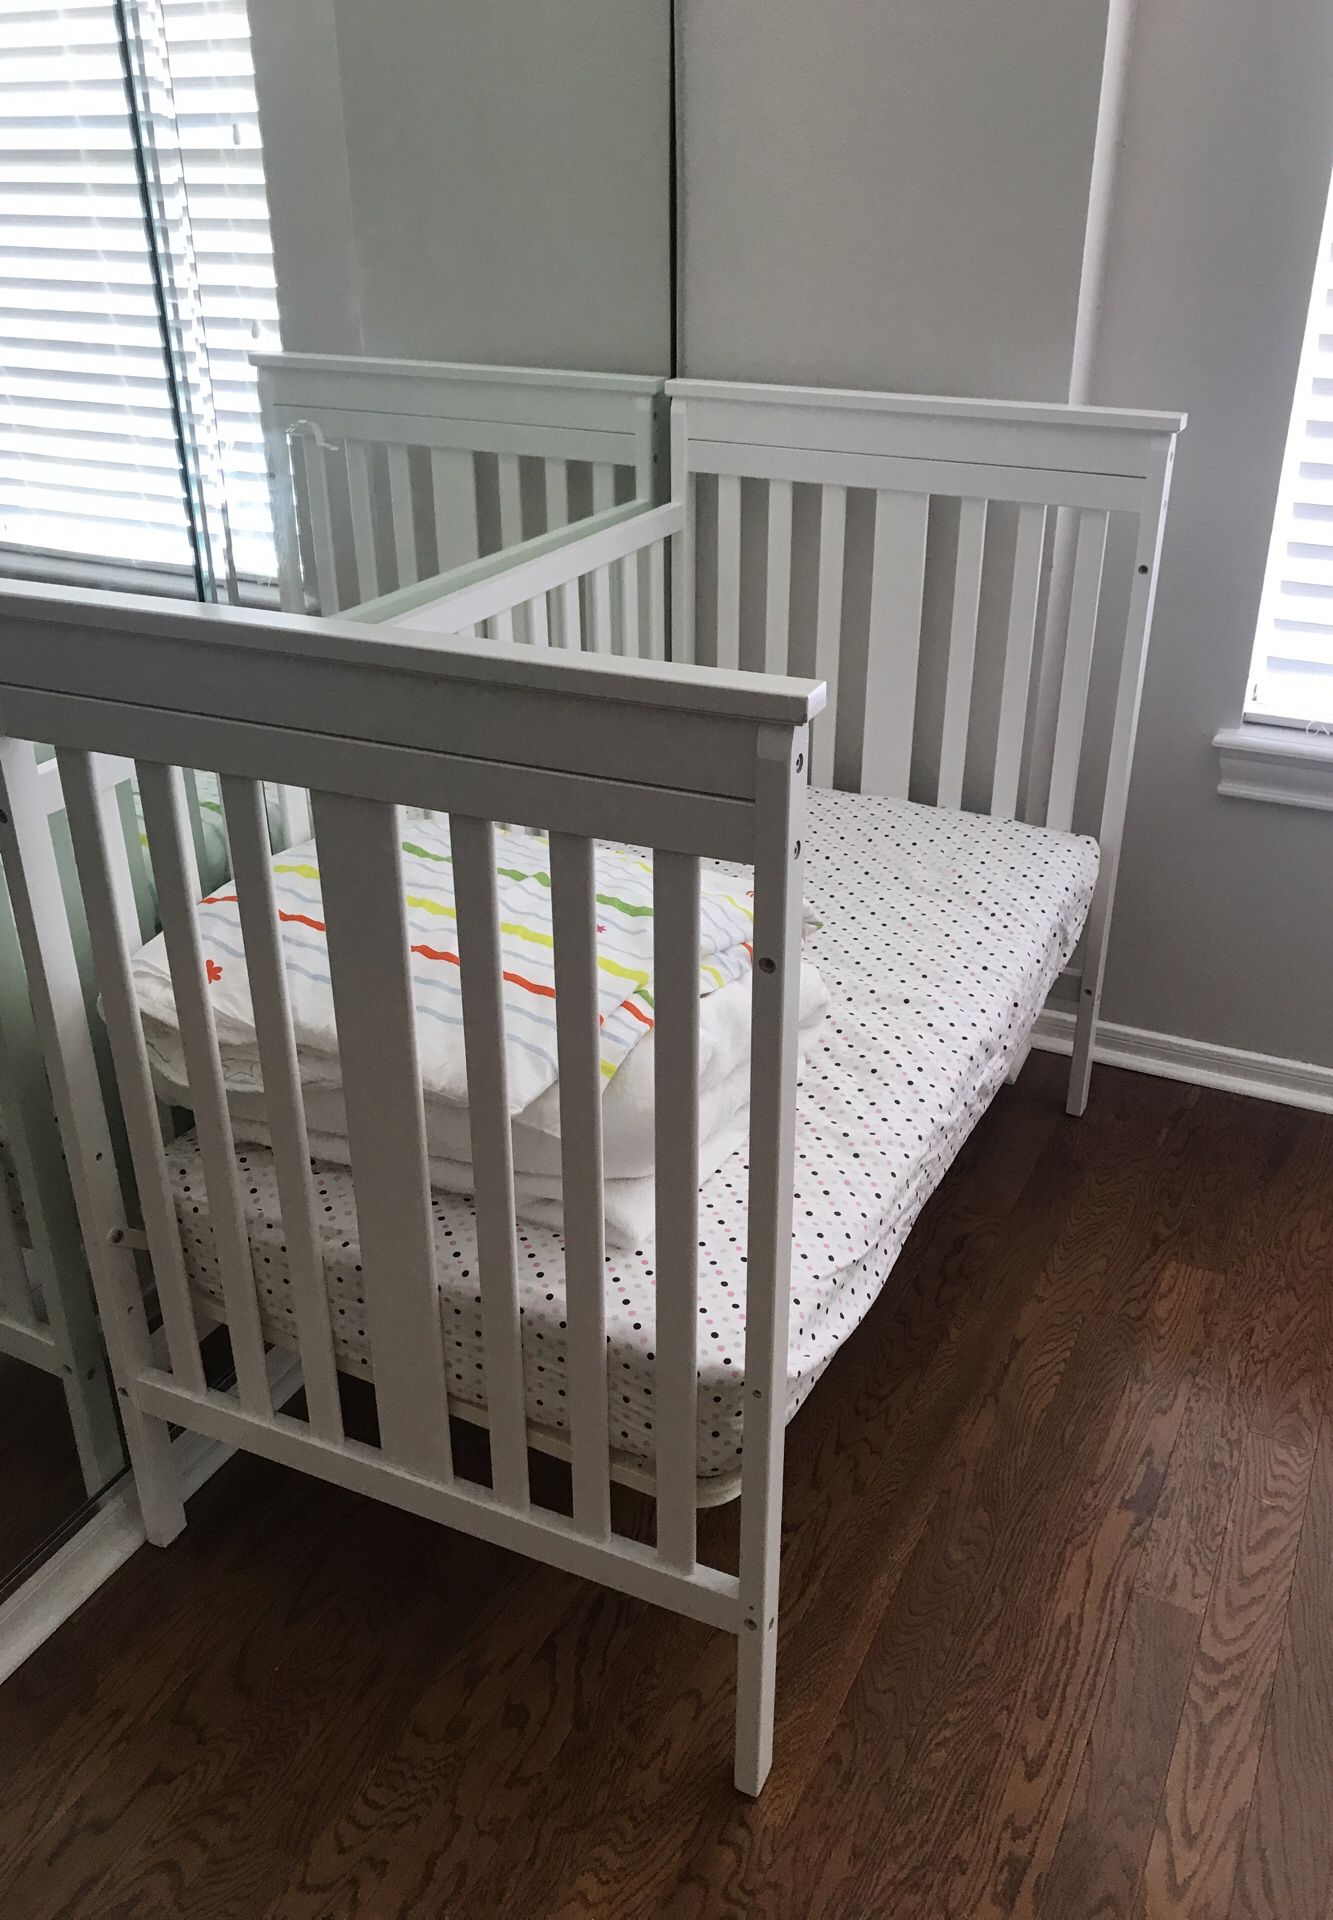 Baby Crib bed with mattress